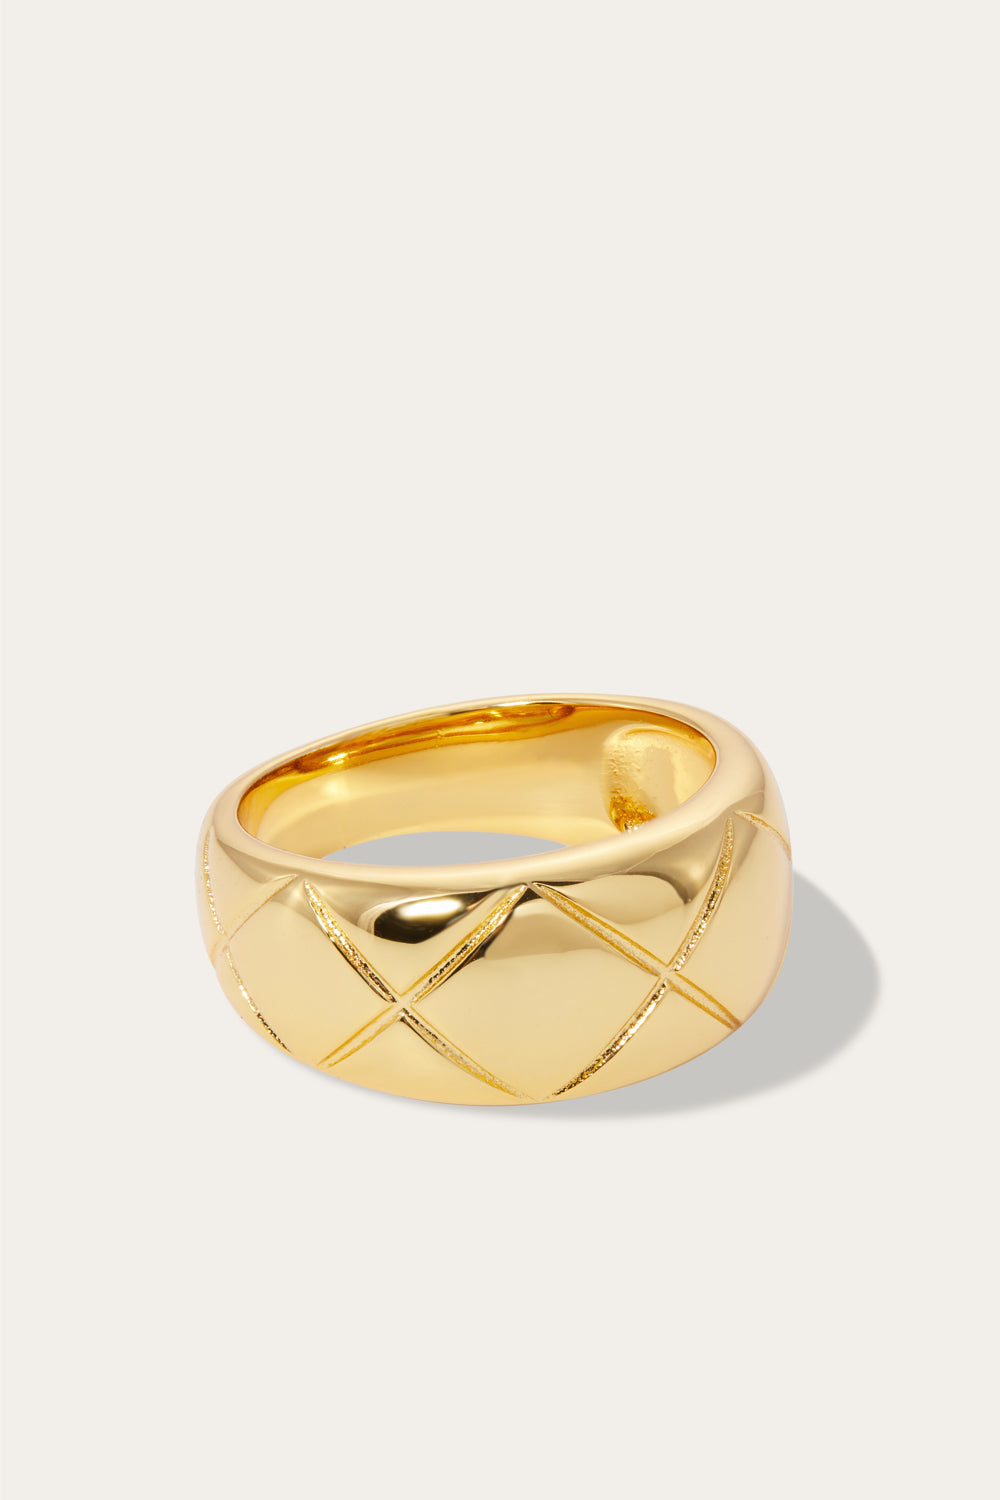 chanel ring gold